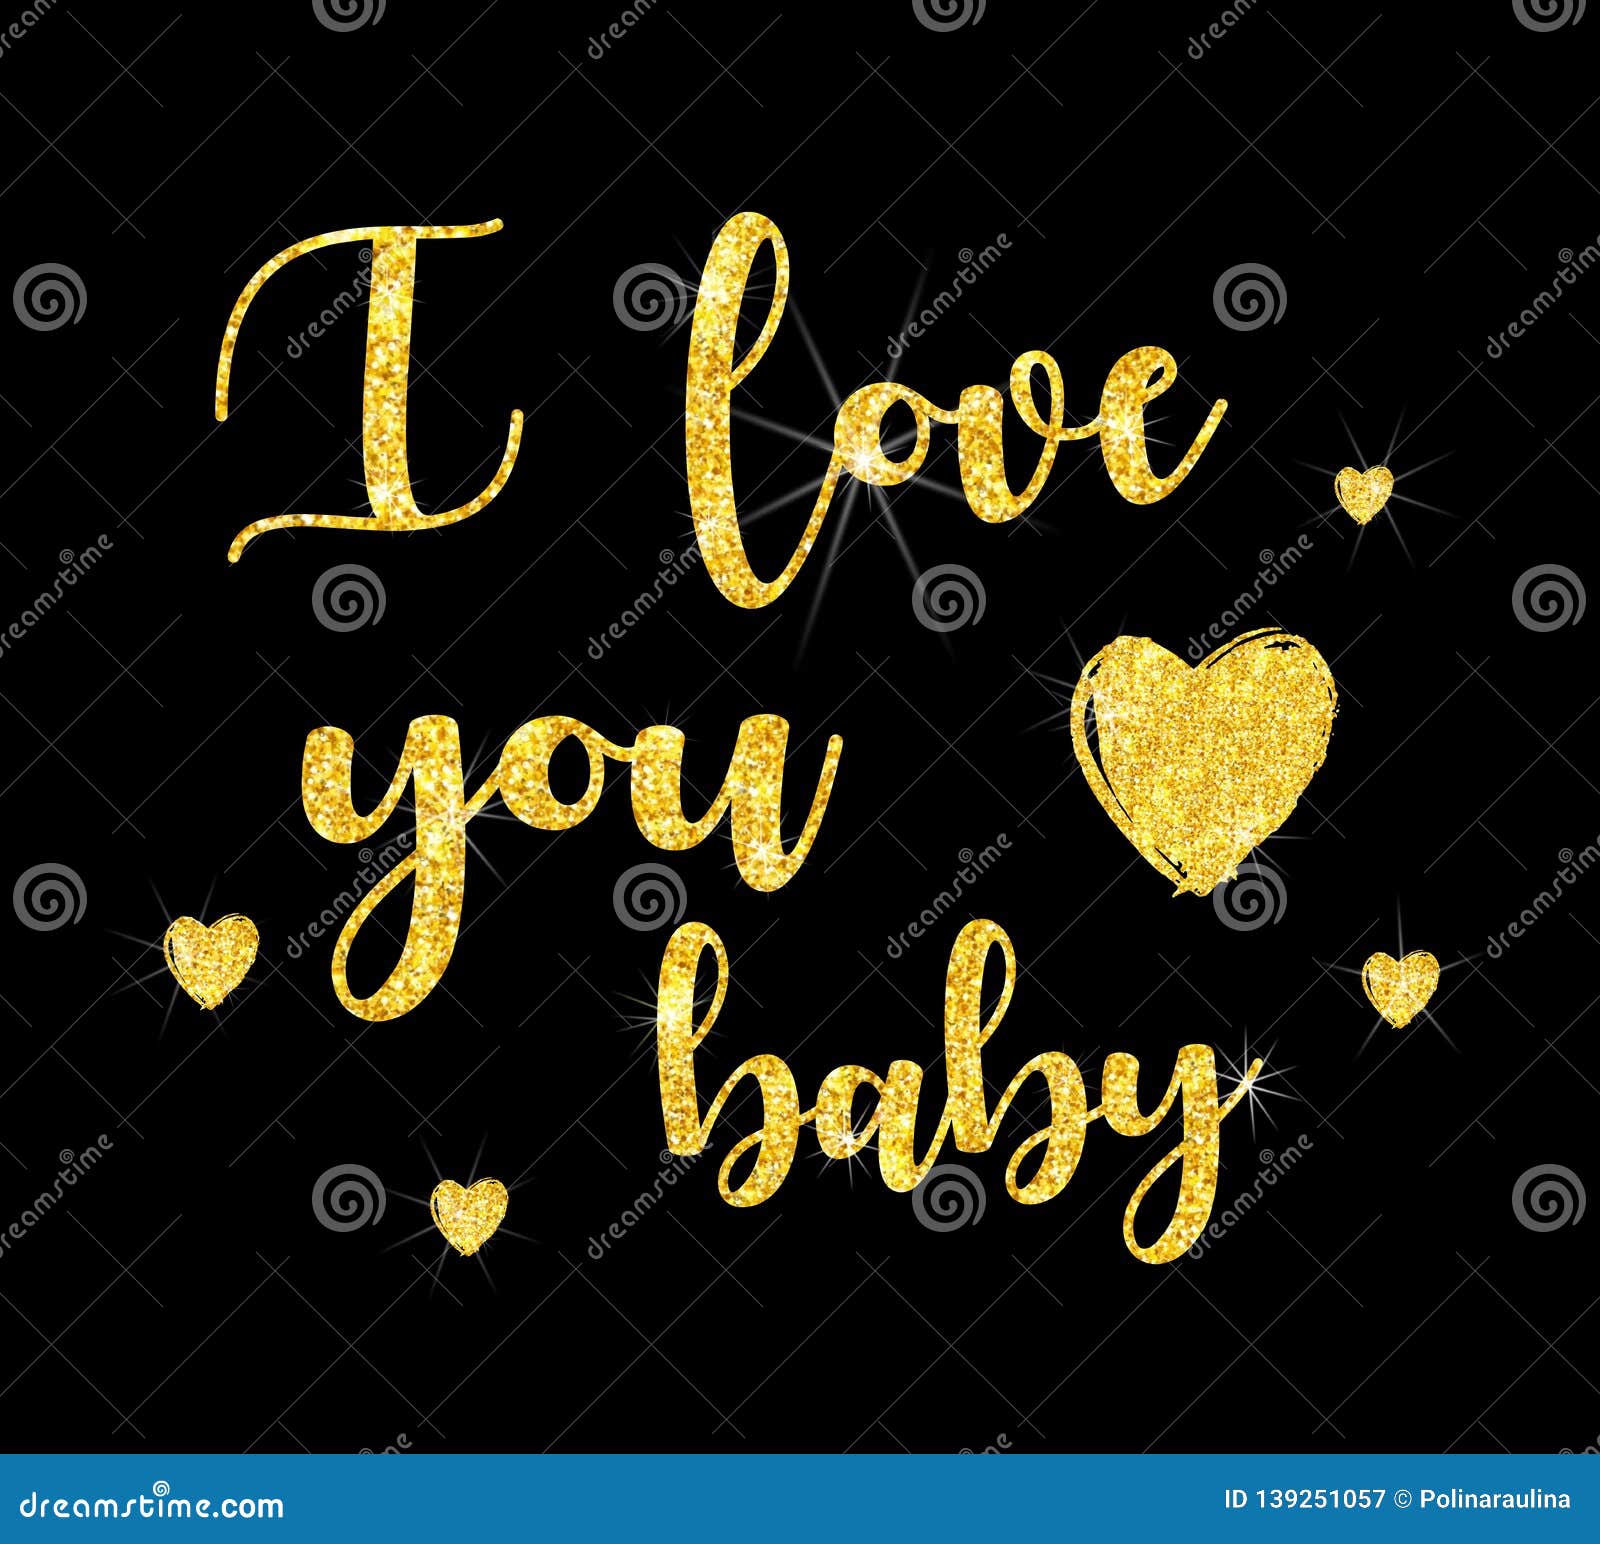 I Love You Baby Glitter Font Lettering Stock Image Illustration Of Font Calligraphic